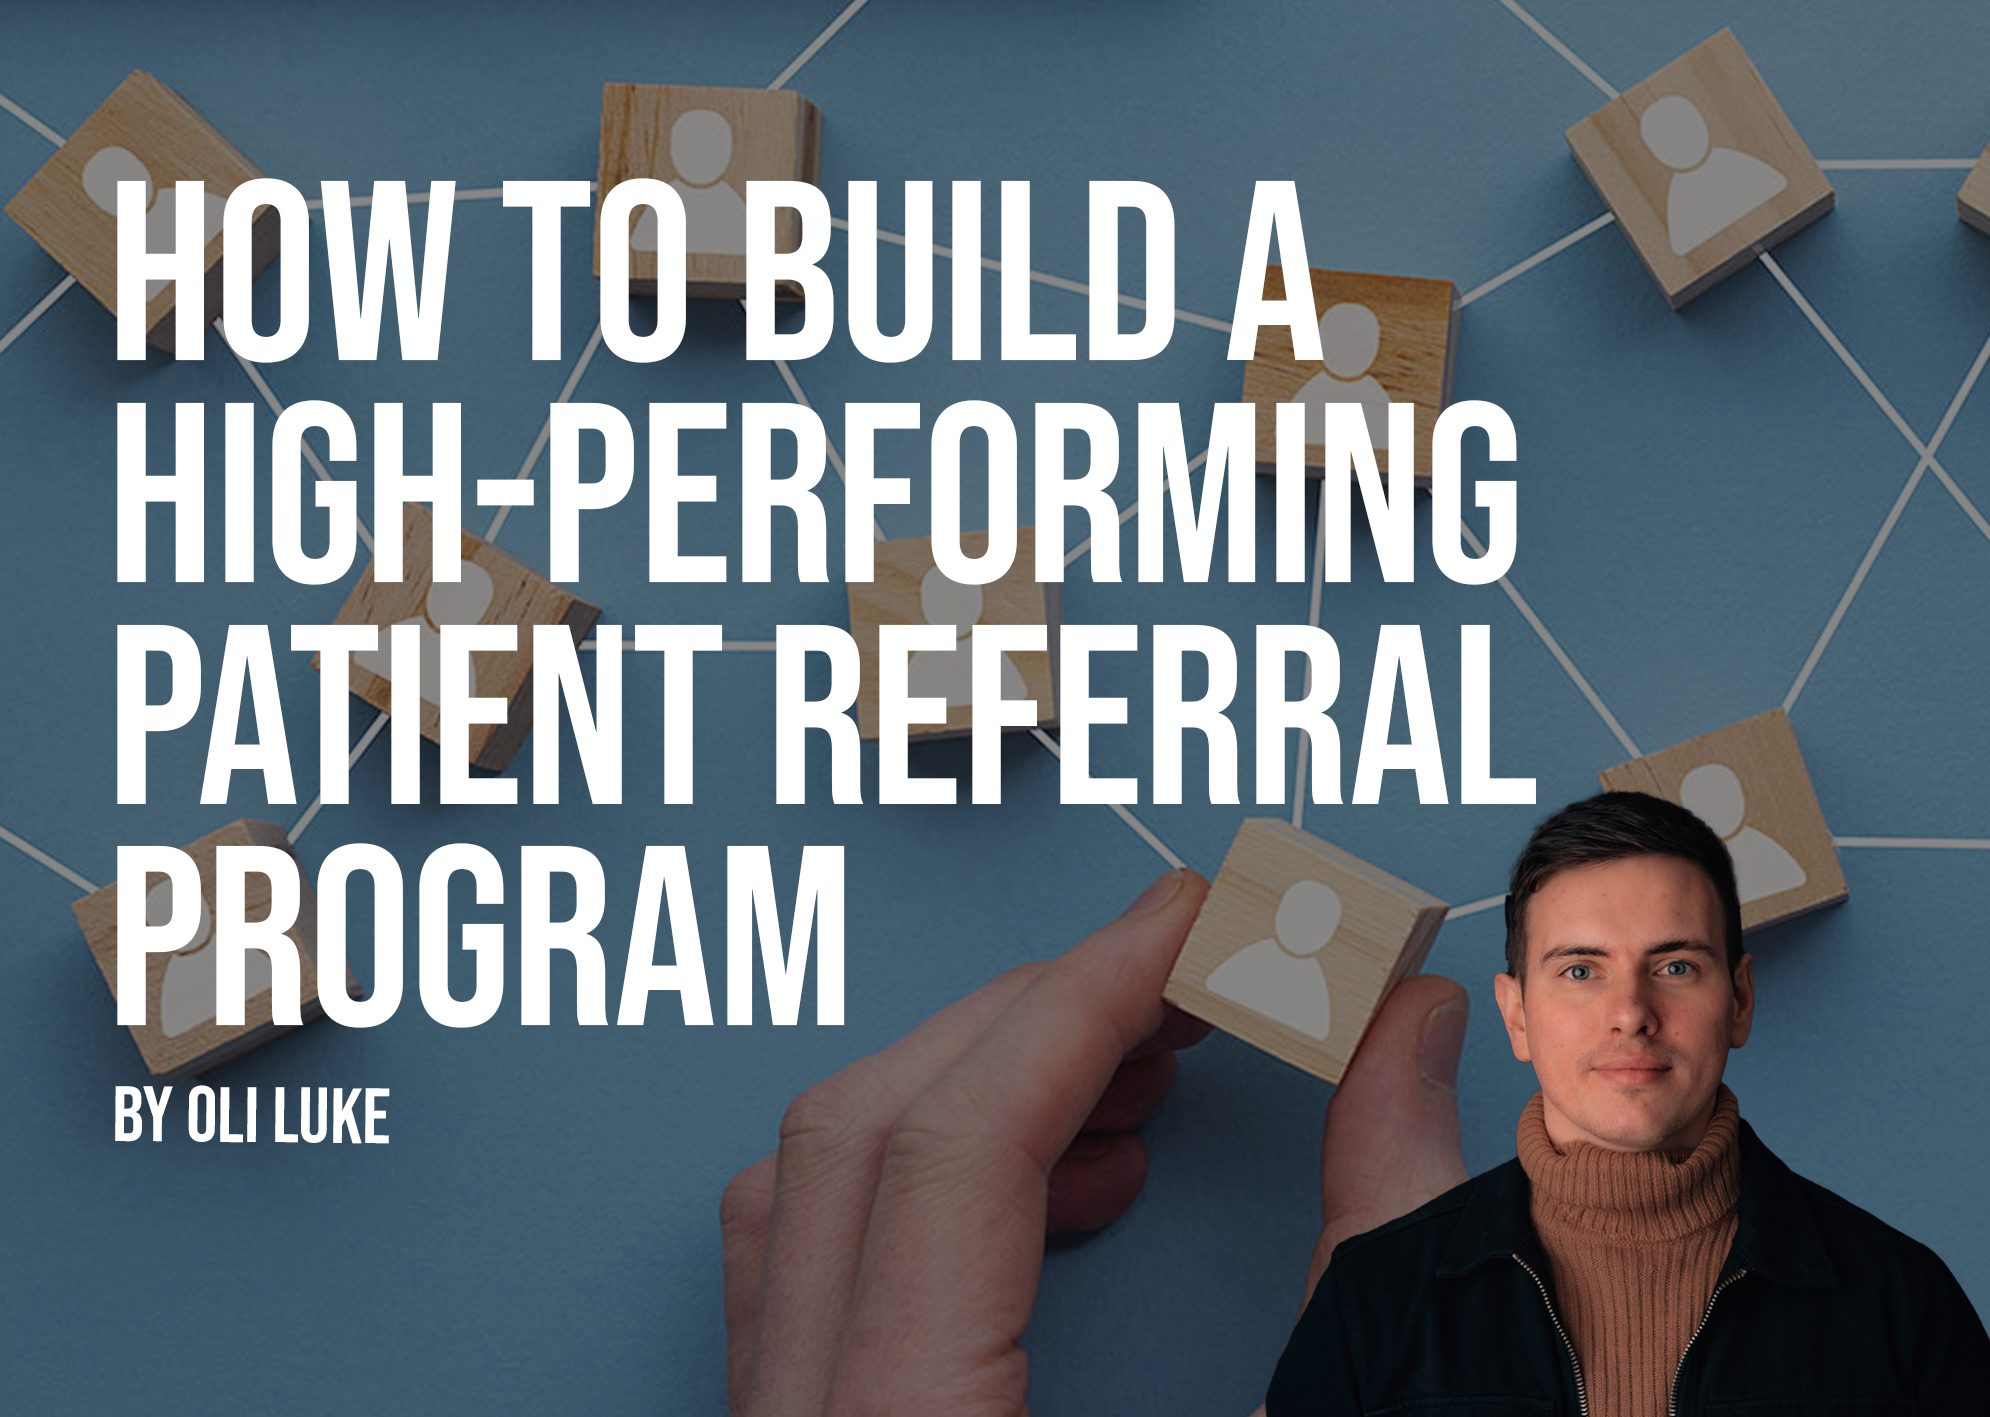 How to build a high-performing patient referral program image